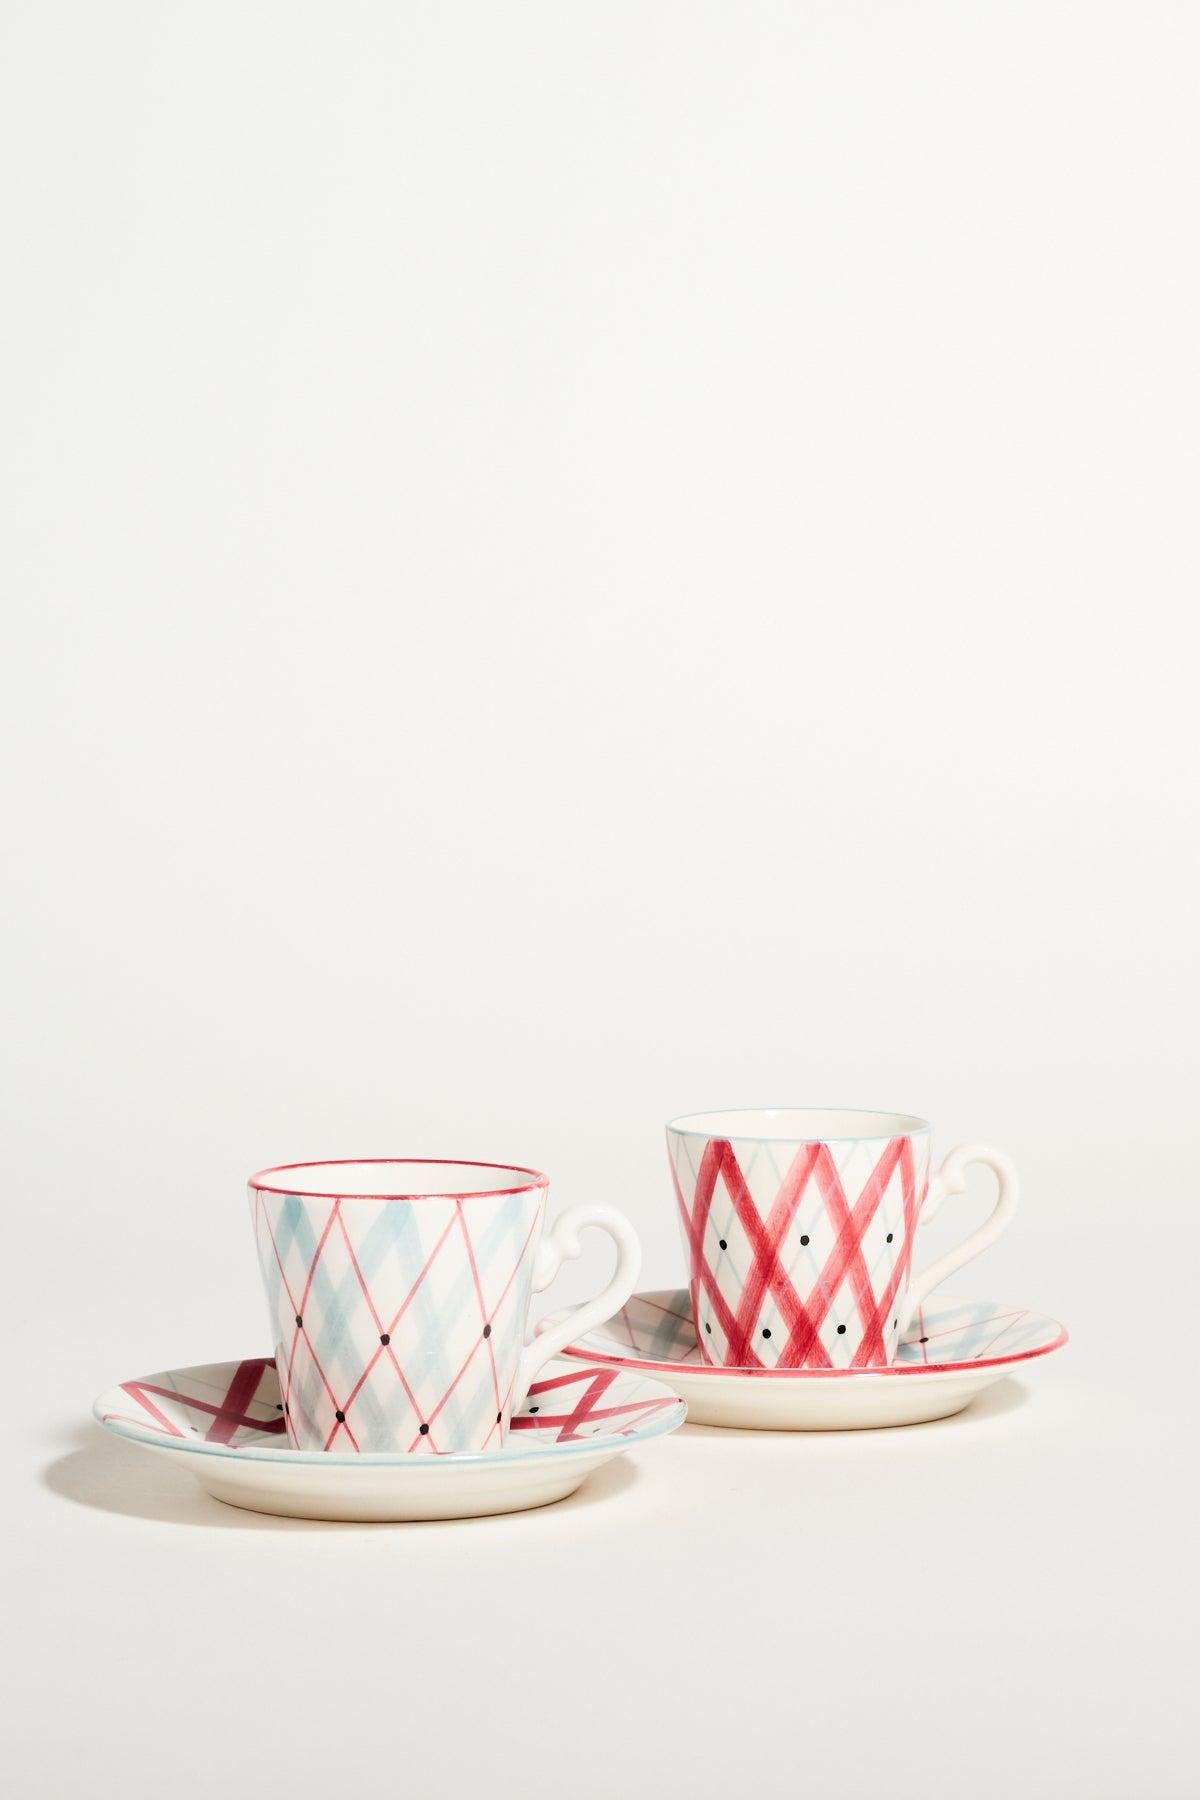 Mid century demitasse set of two in a raspberry pink and pale blue geometric pattern.